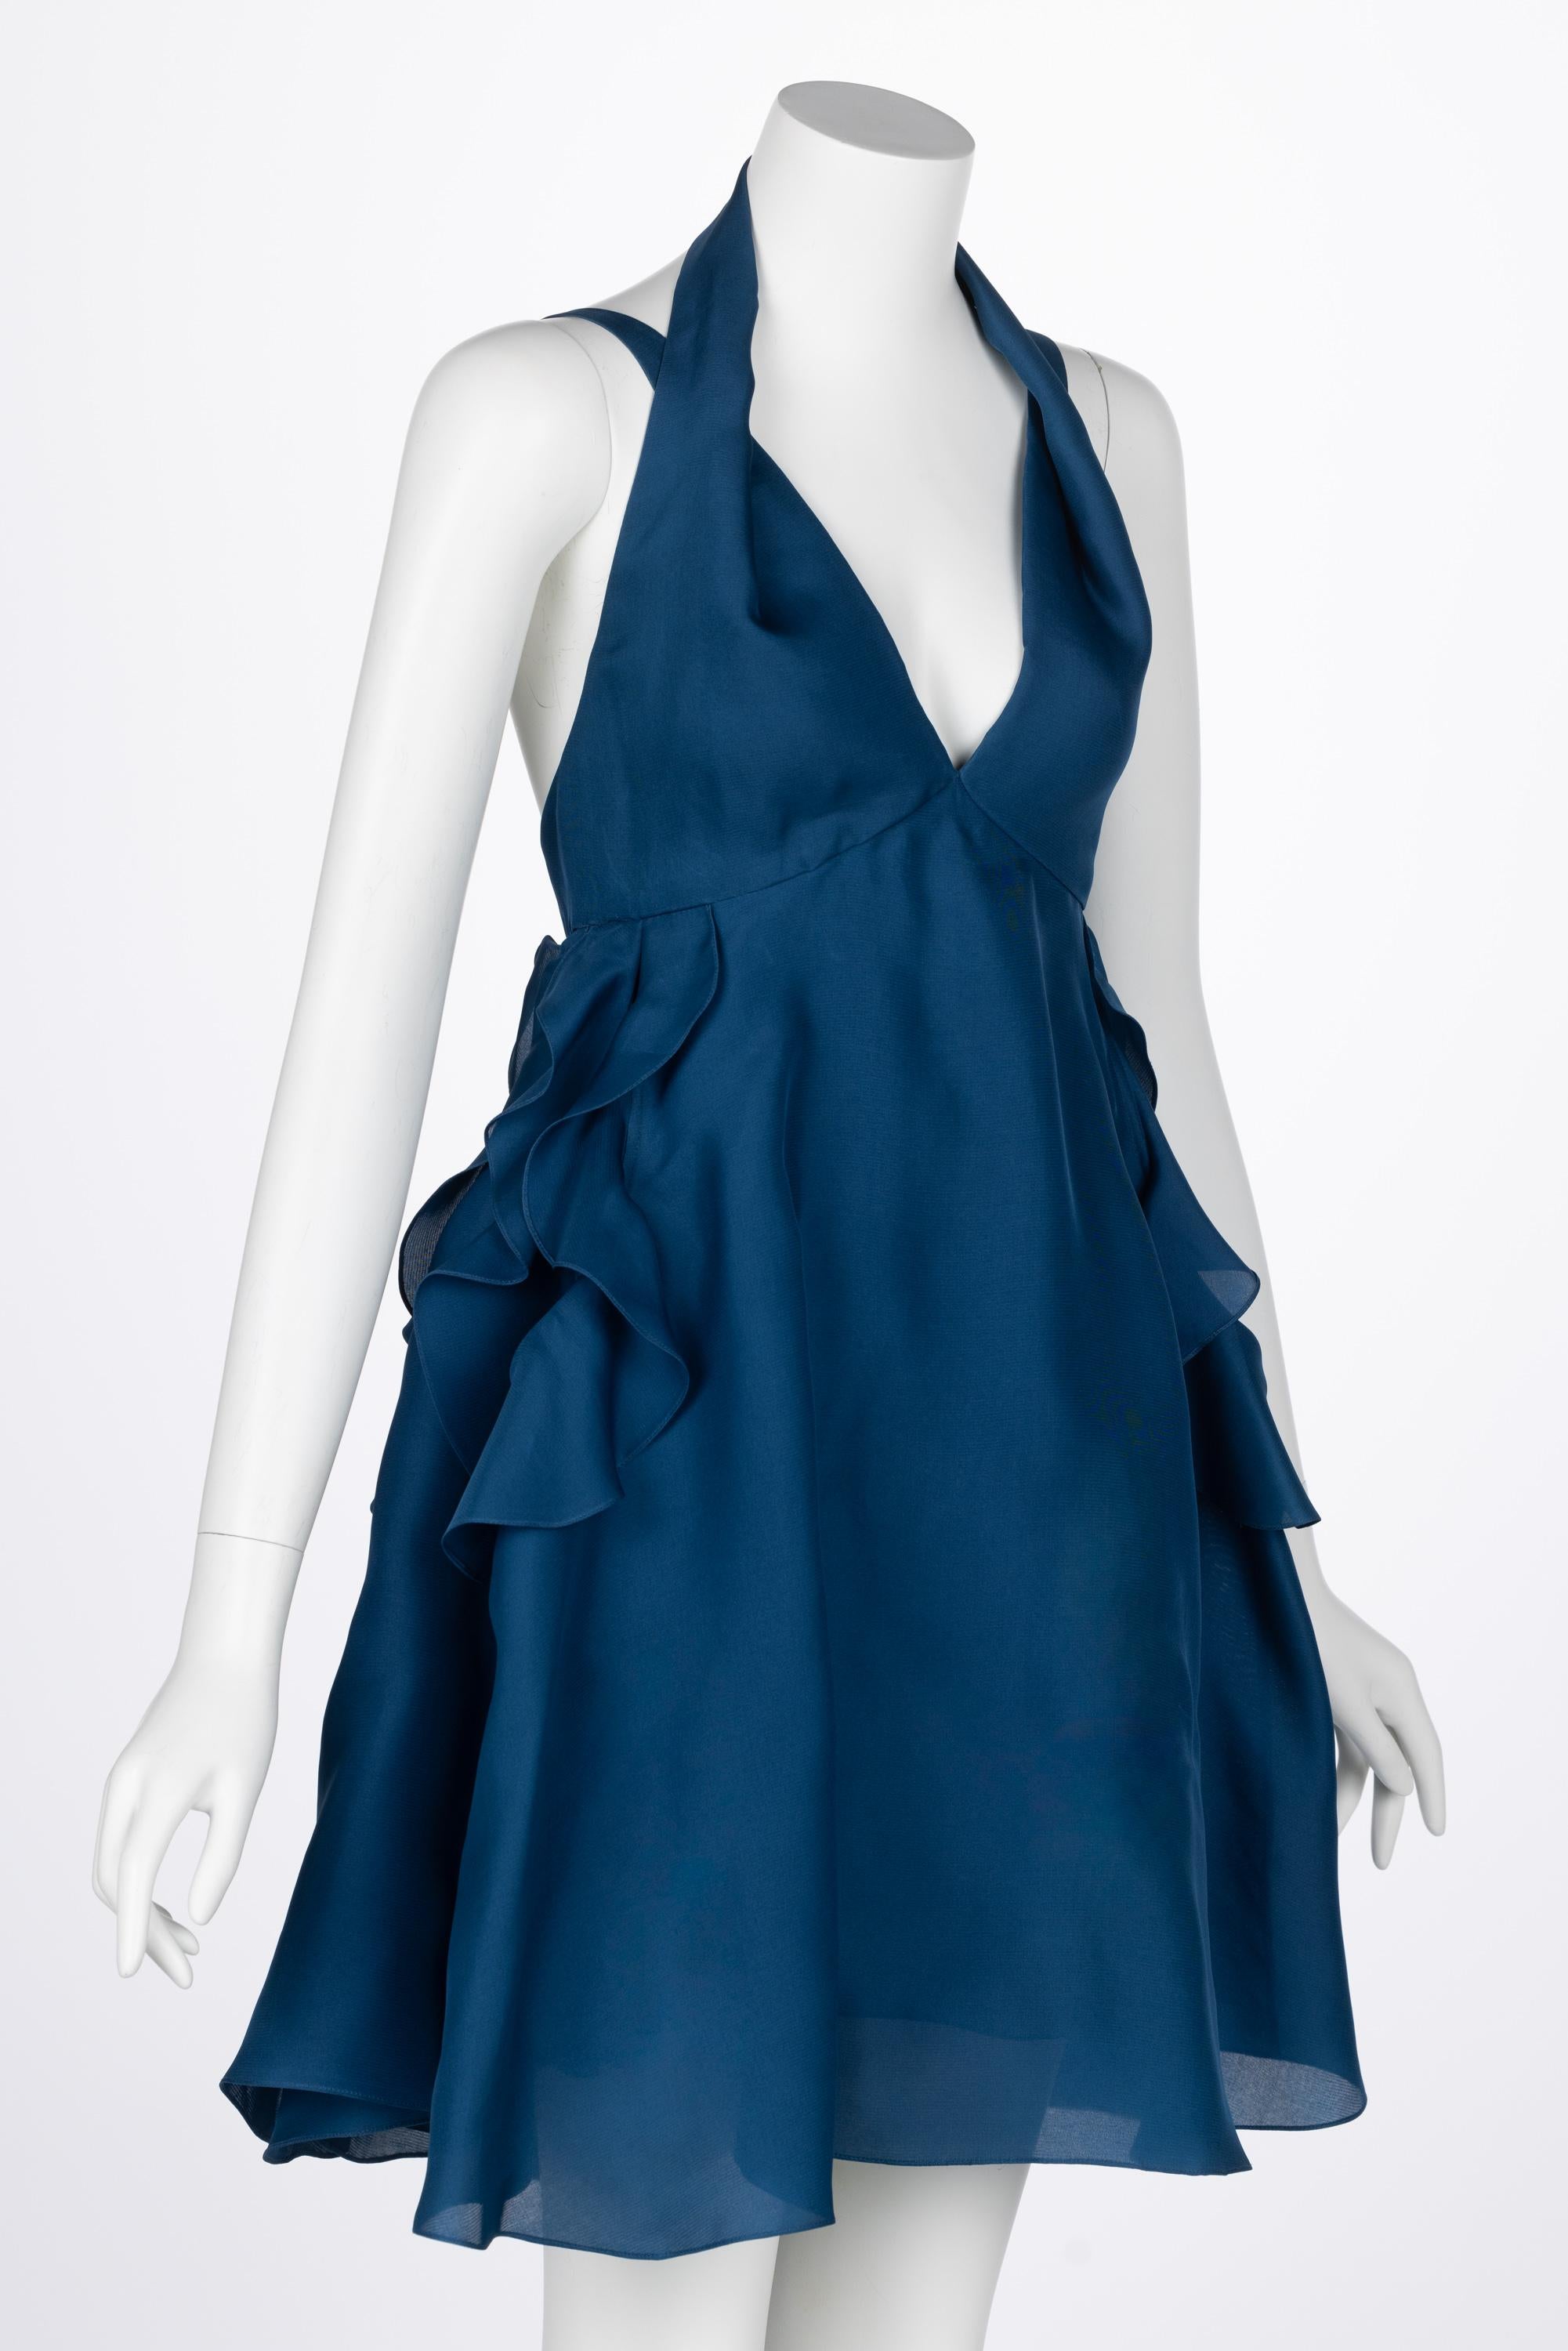 Yves Saint Laurent Blue Silk Organza Spring 2012 Runway Dress In Good Condition For Sale In Boca Raton, FL